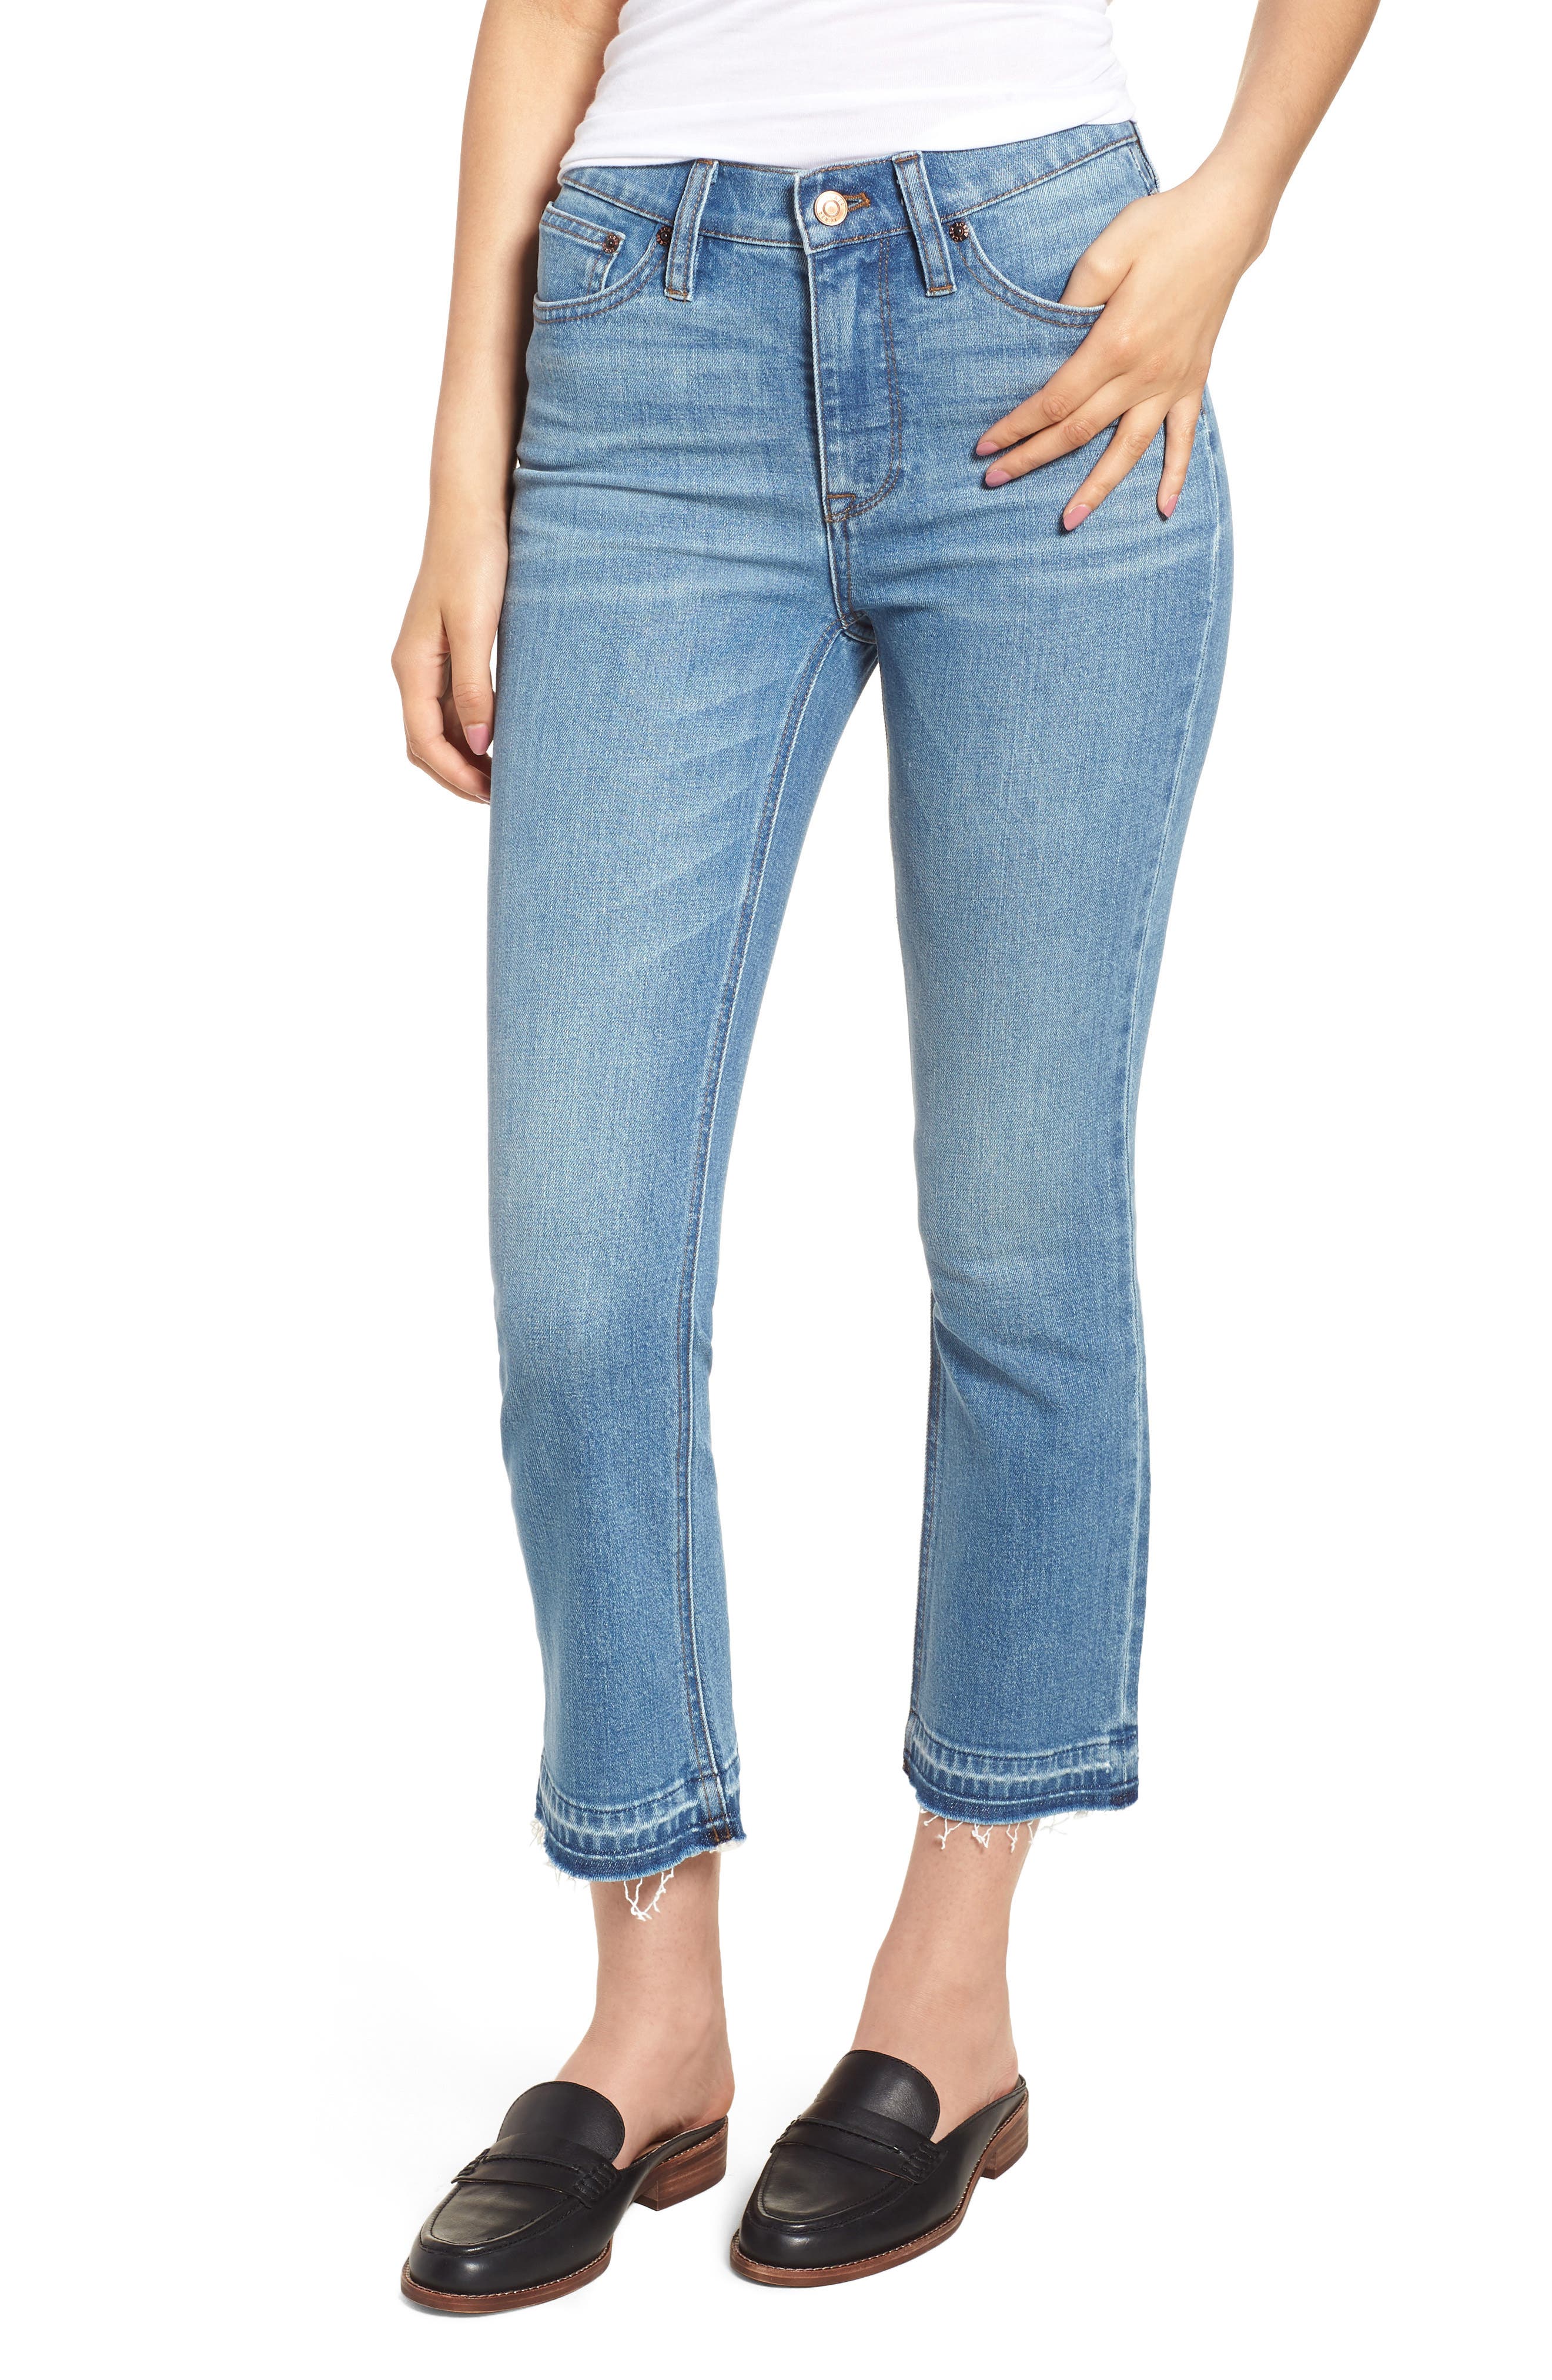 j crew cropped jeans